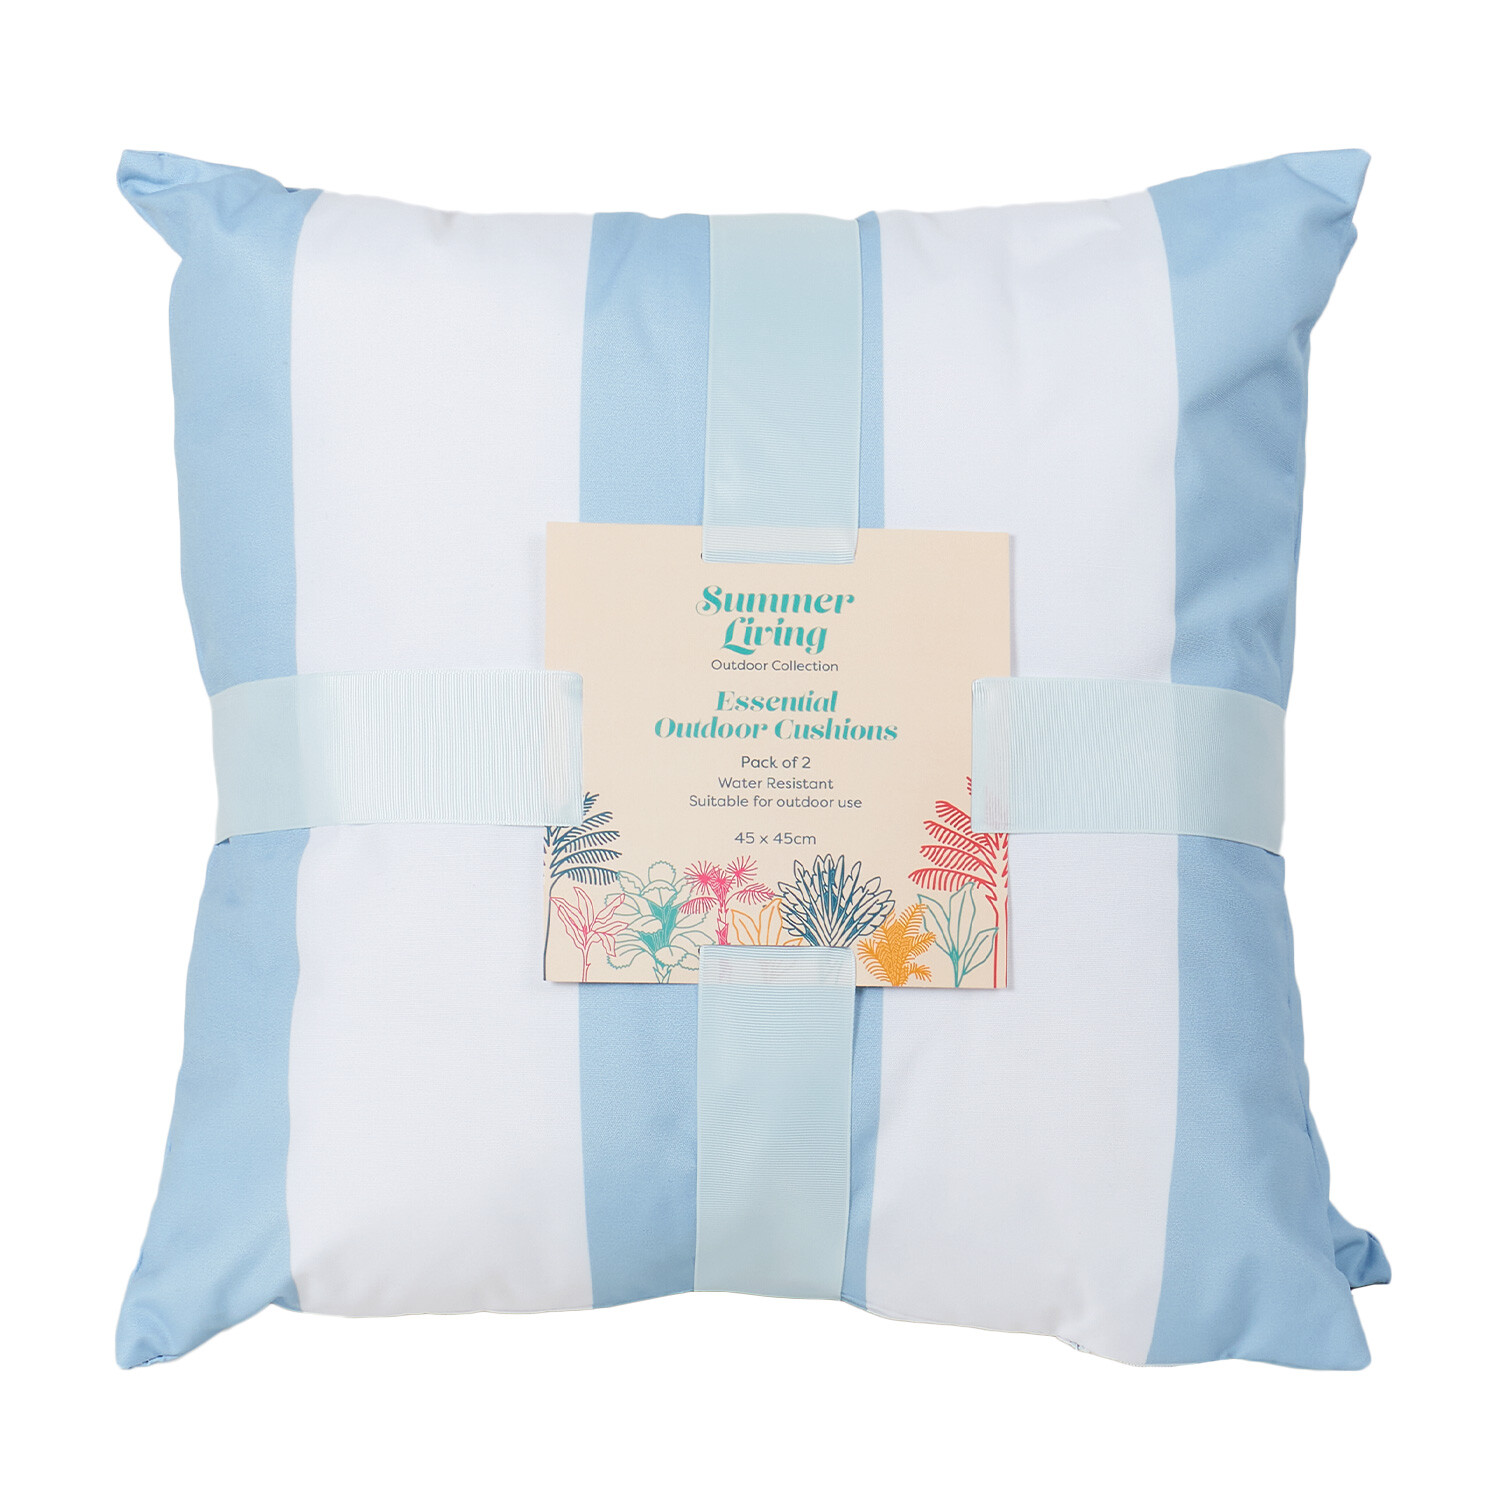 Essential Outdoor Cushions - Light Blue Image 1